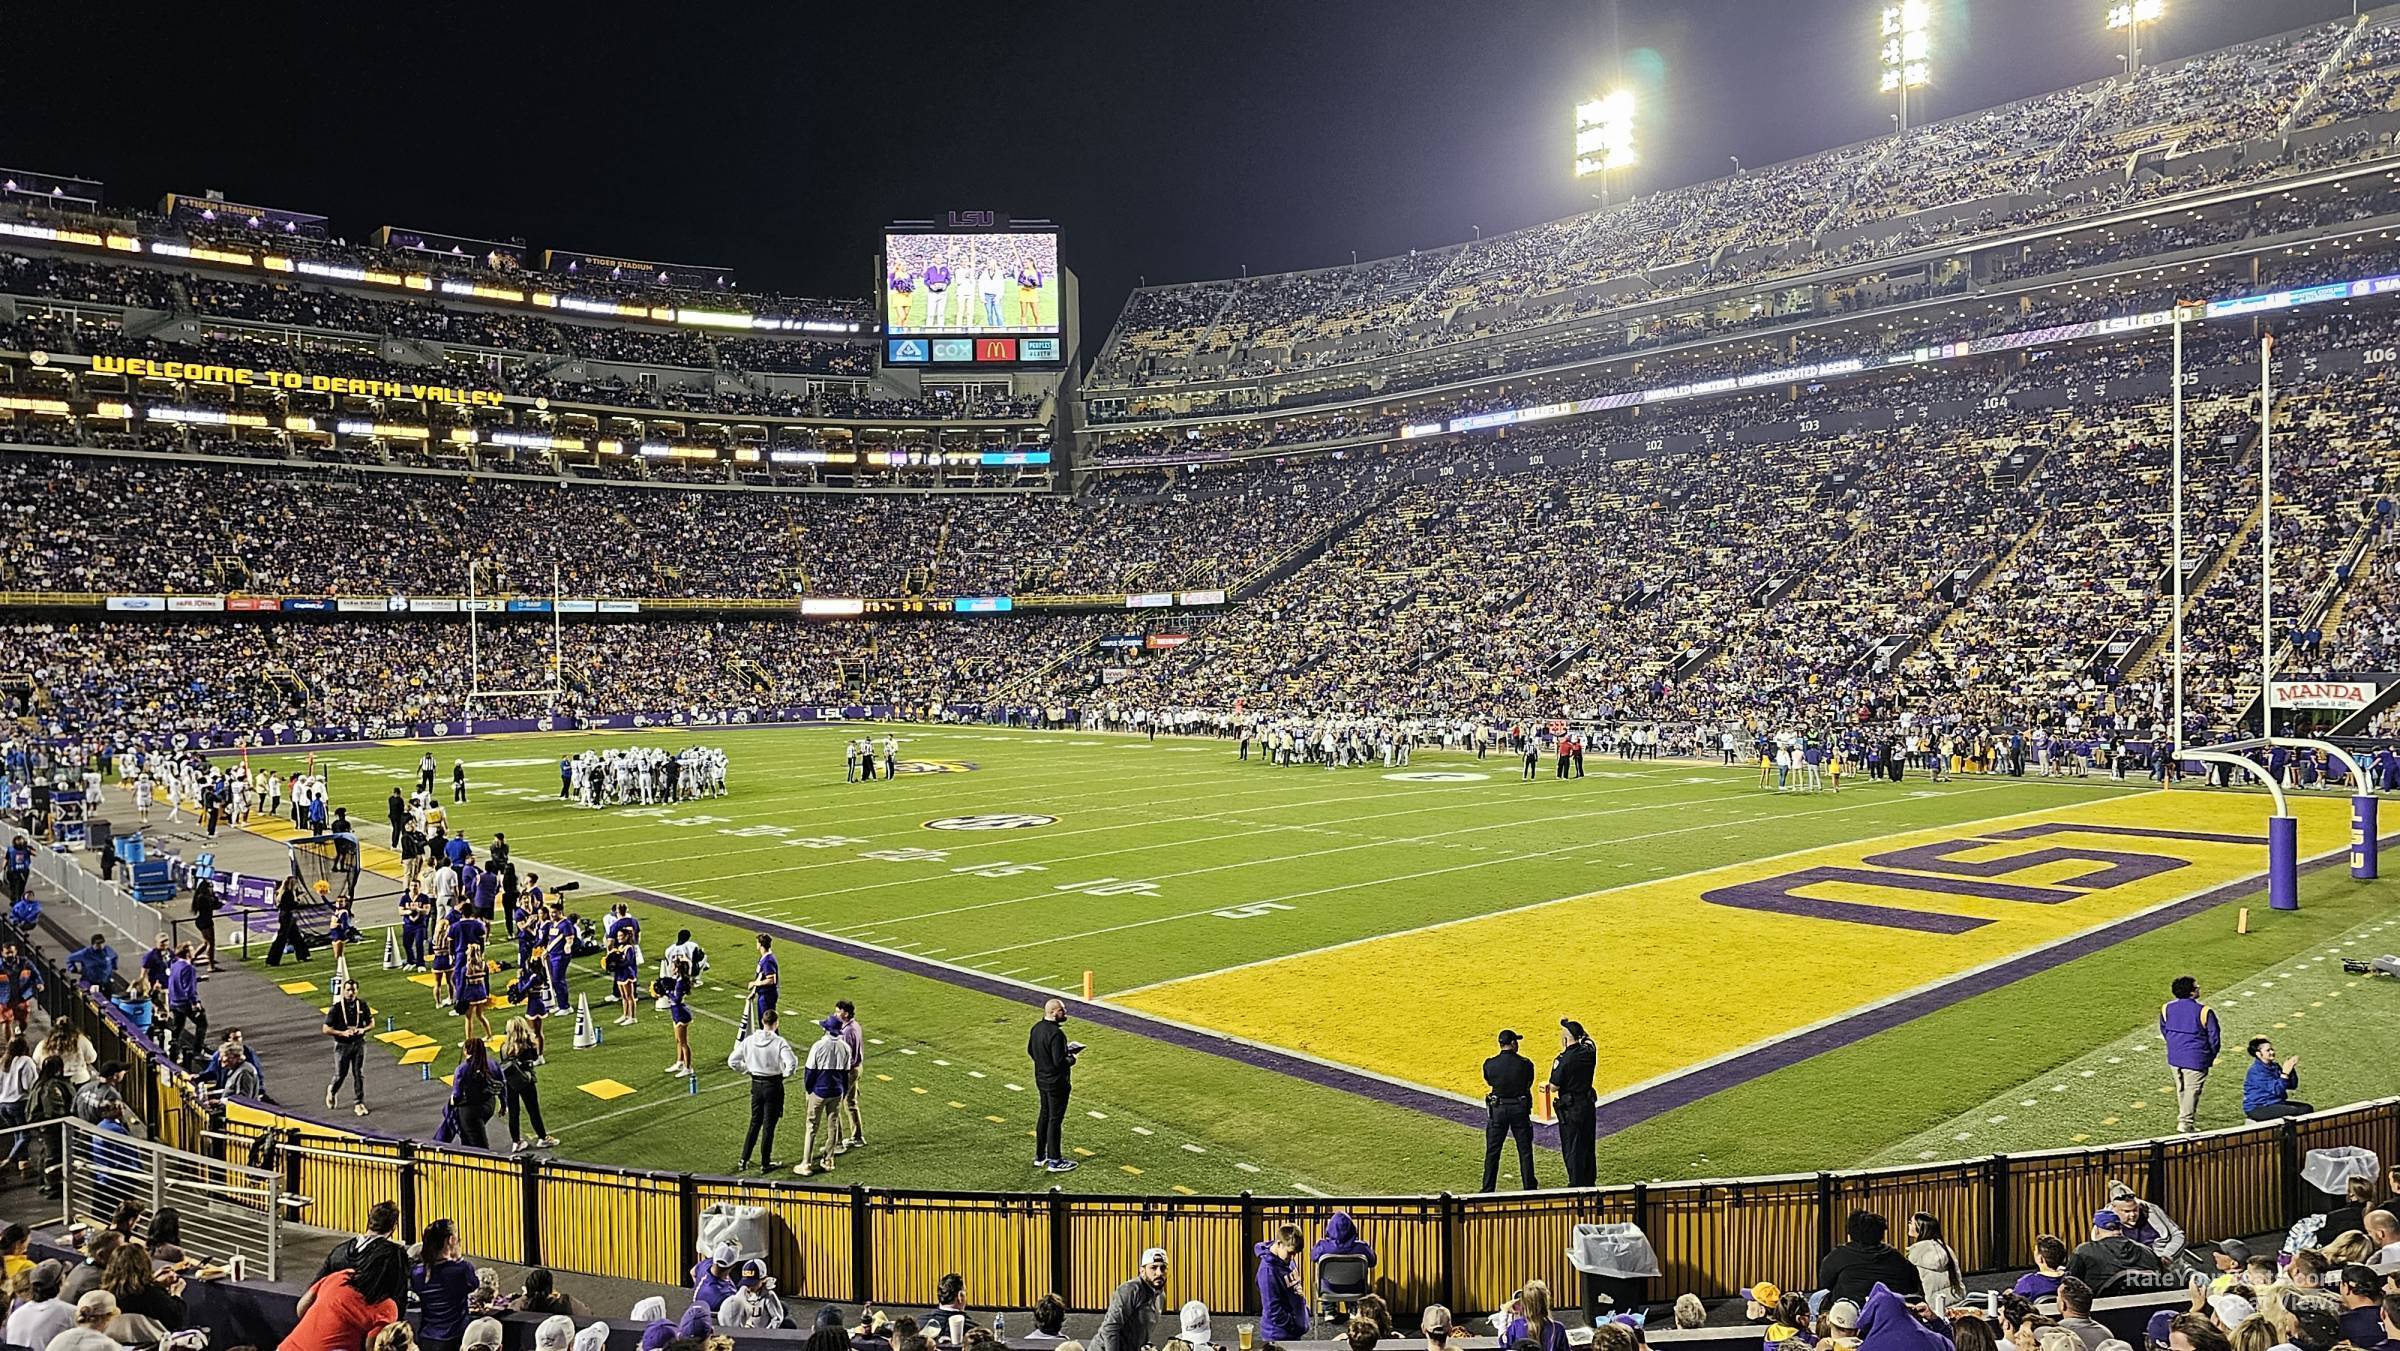 section 213, row 1 seat view  - tiger stadium